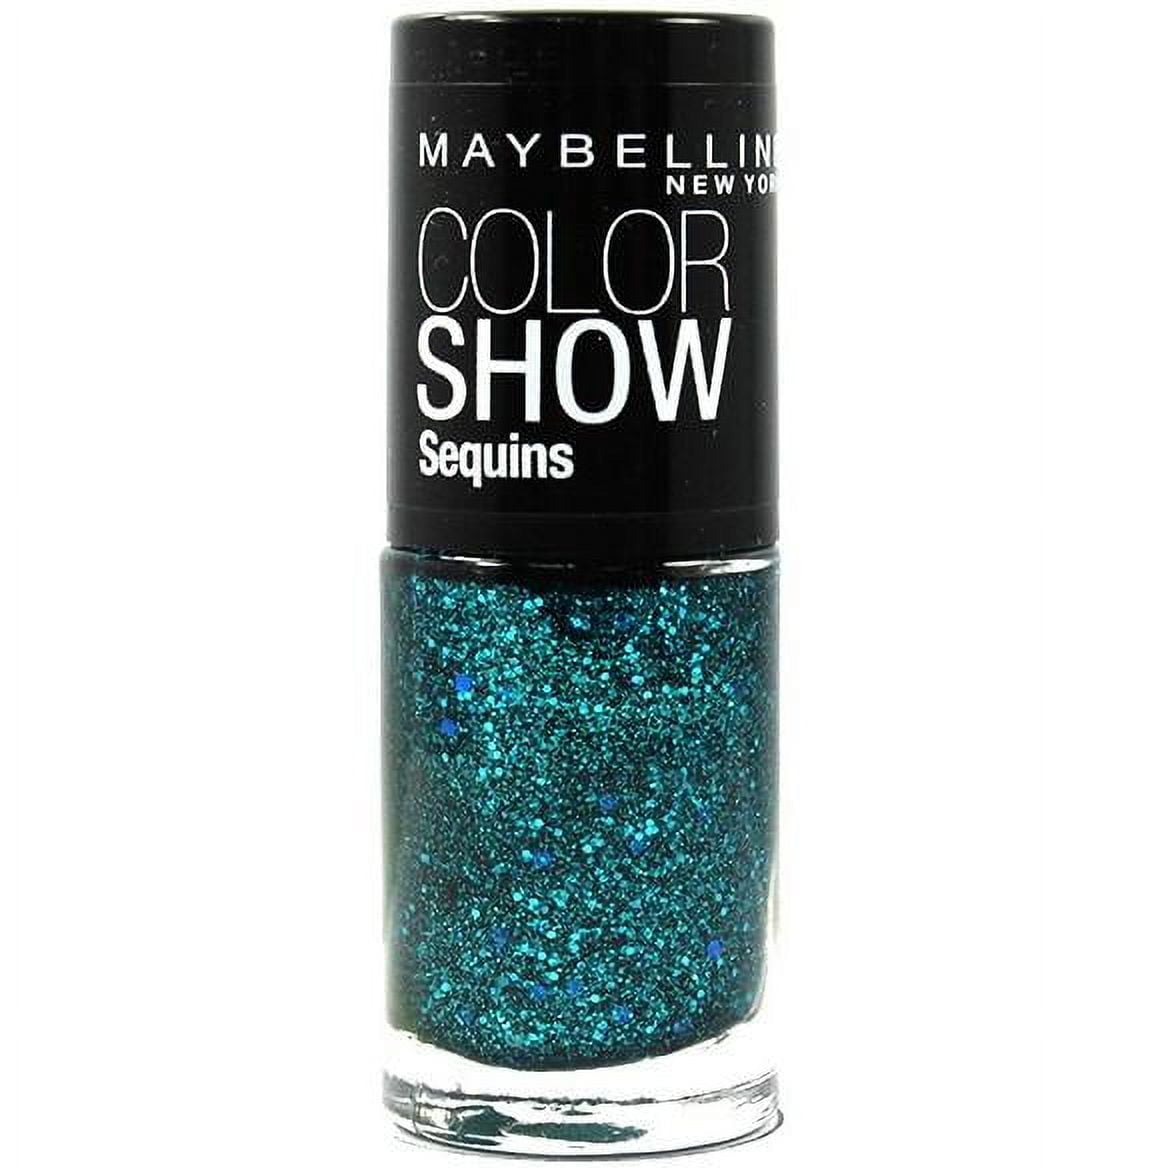 Lacquer Buzz: Monday Blues: Maybelline Brocades Beaming Blue